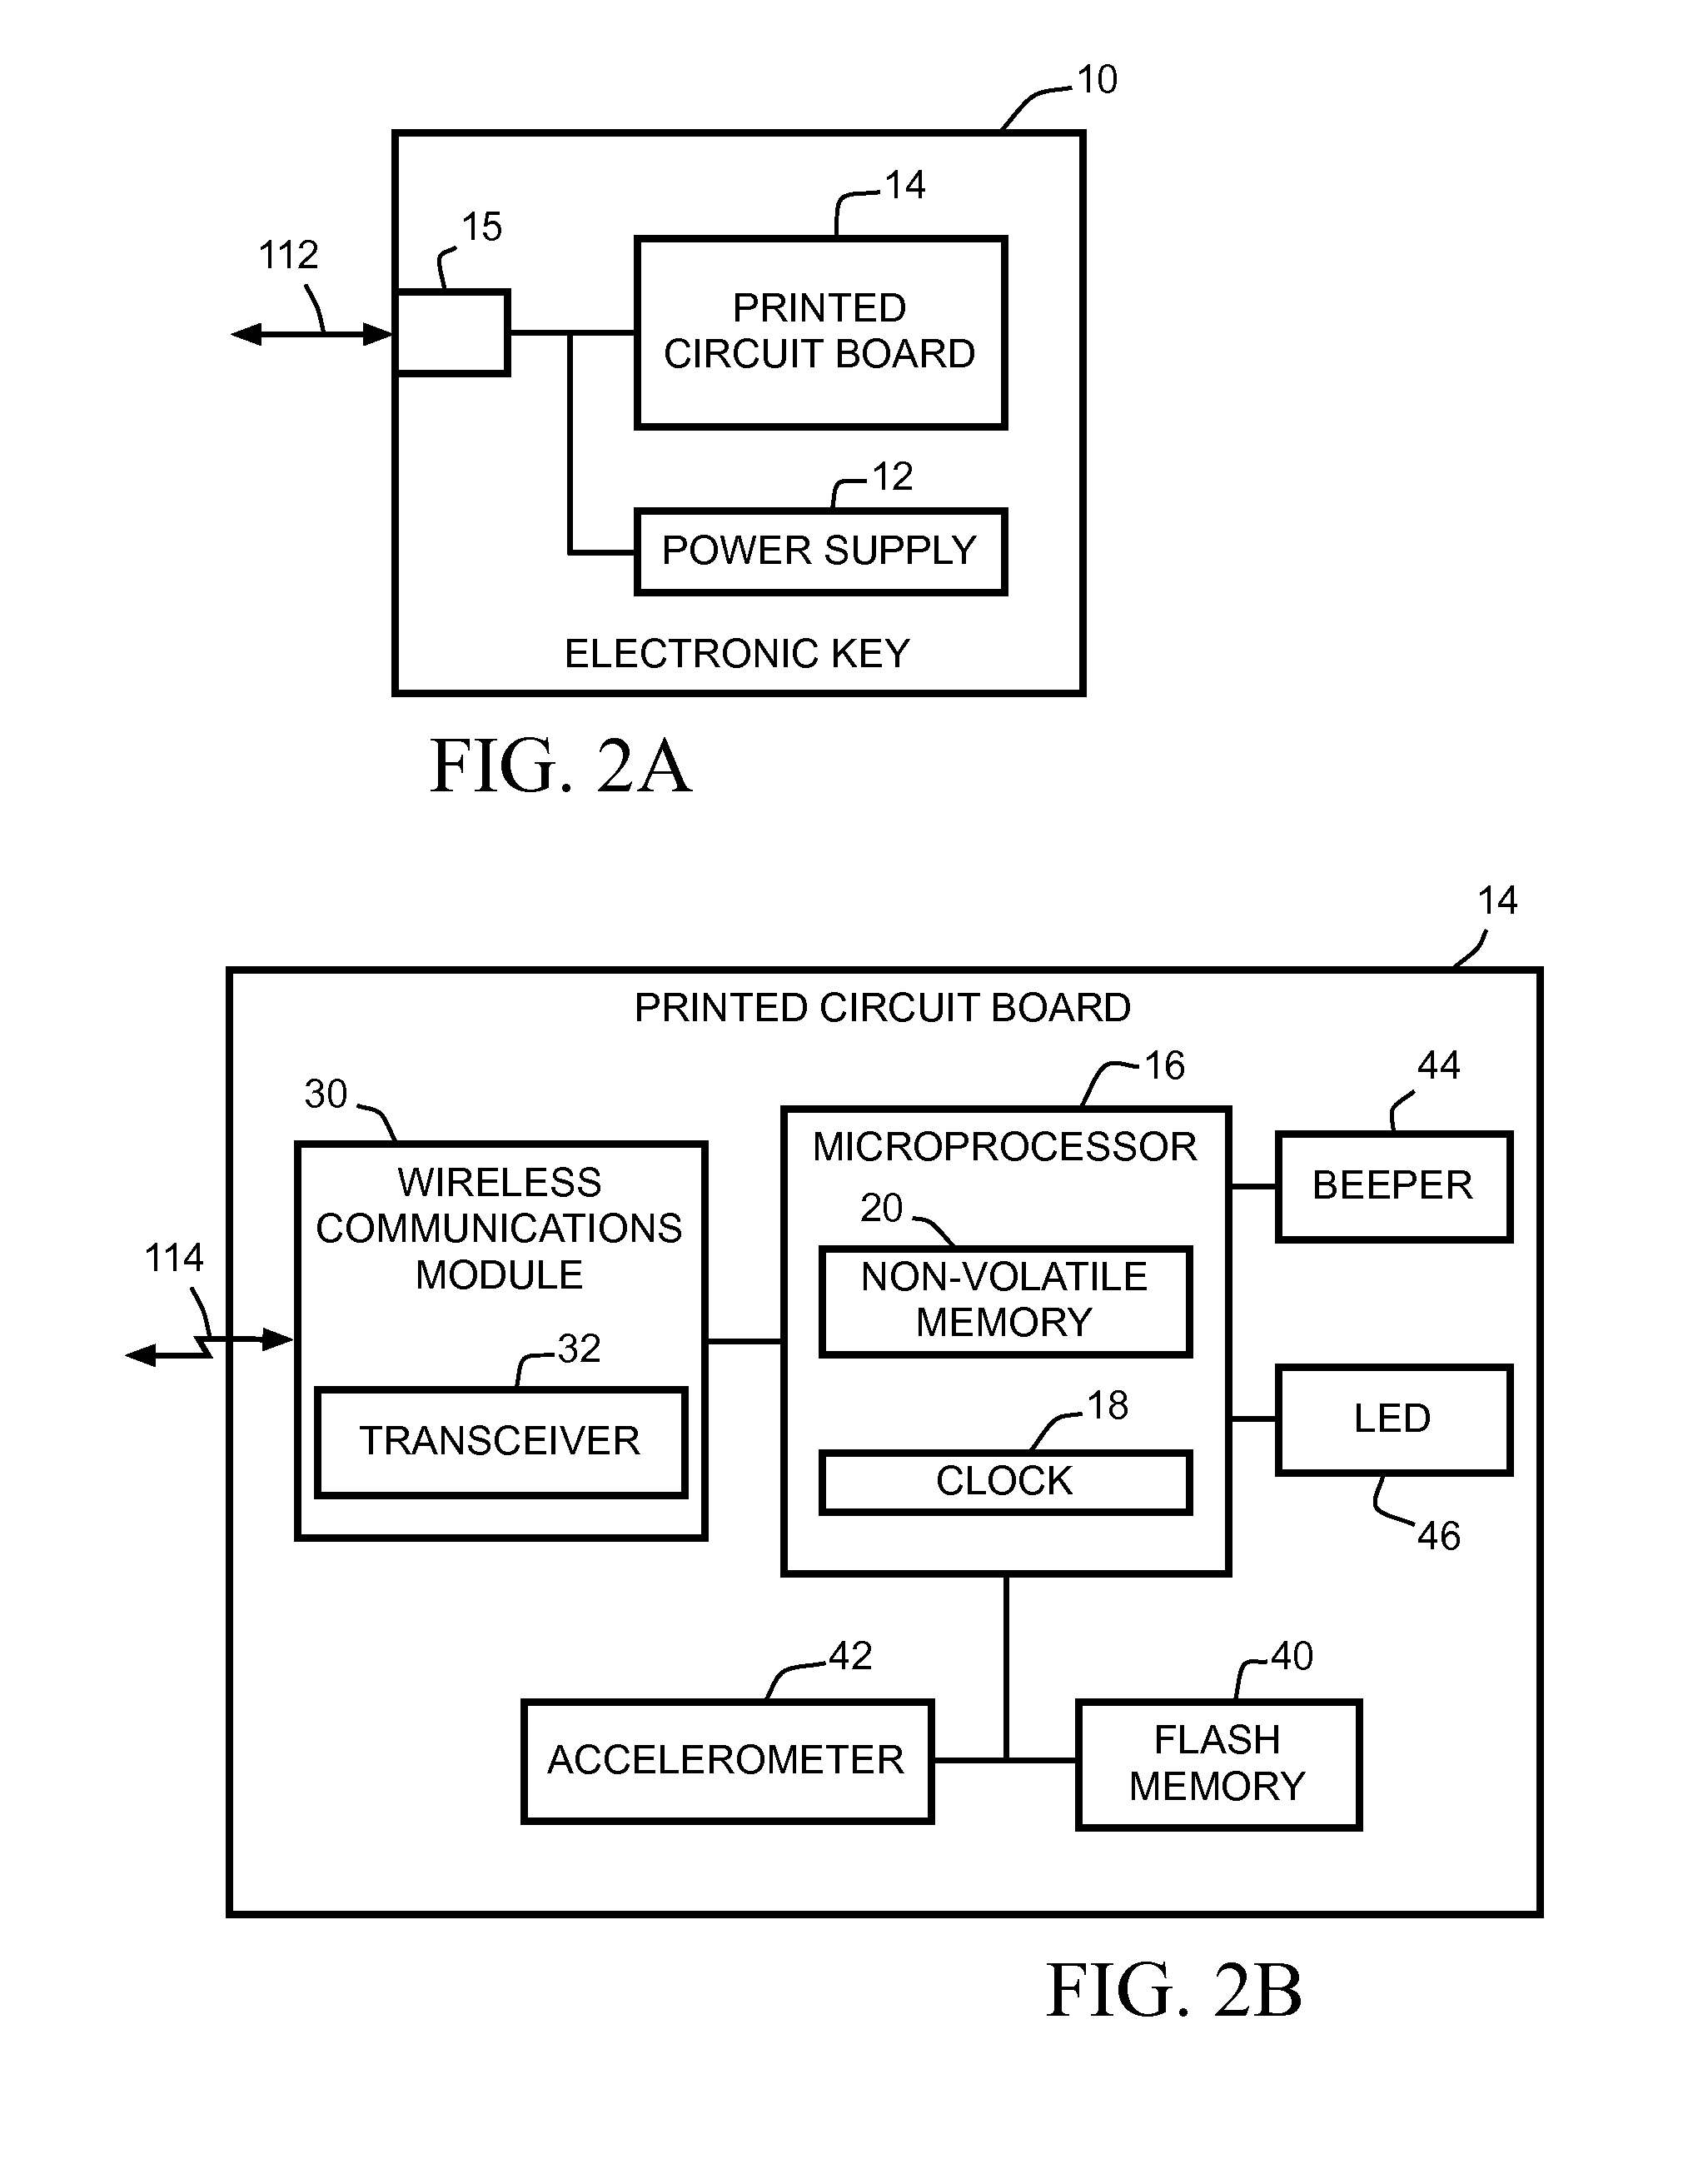 Apparatus and method for remote administration and recurrent updating of credentials in an access control system